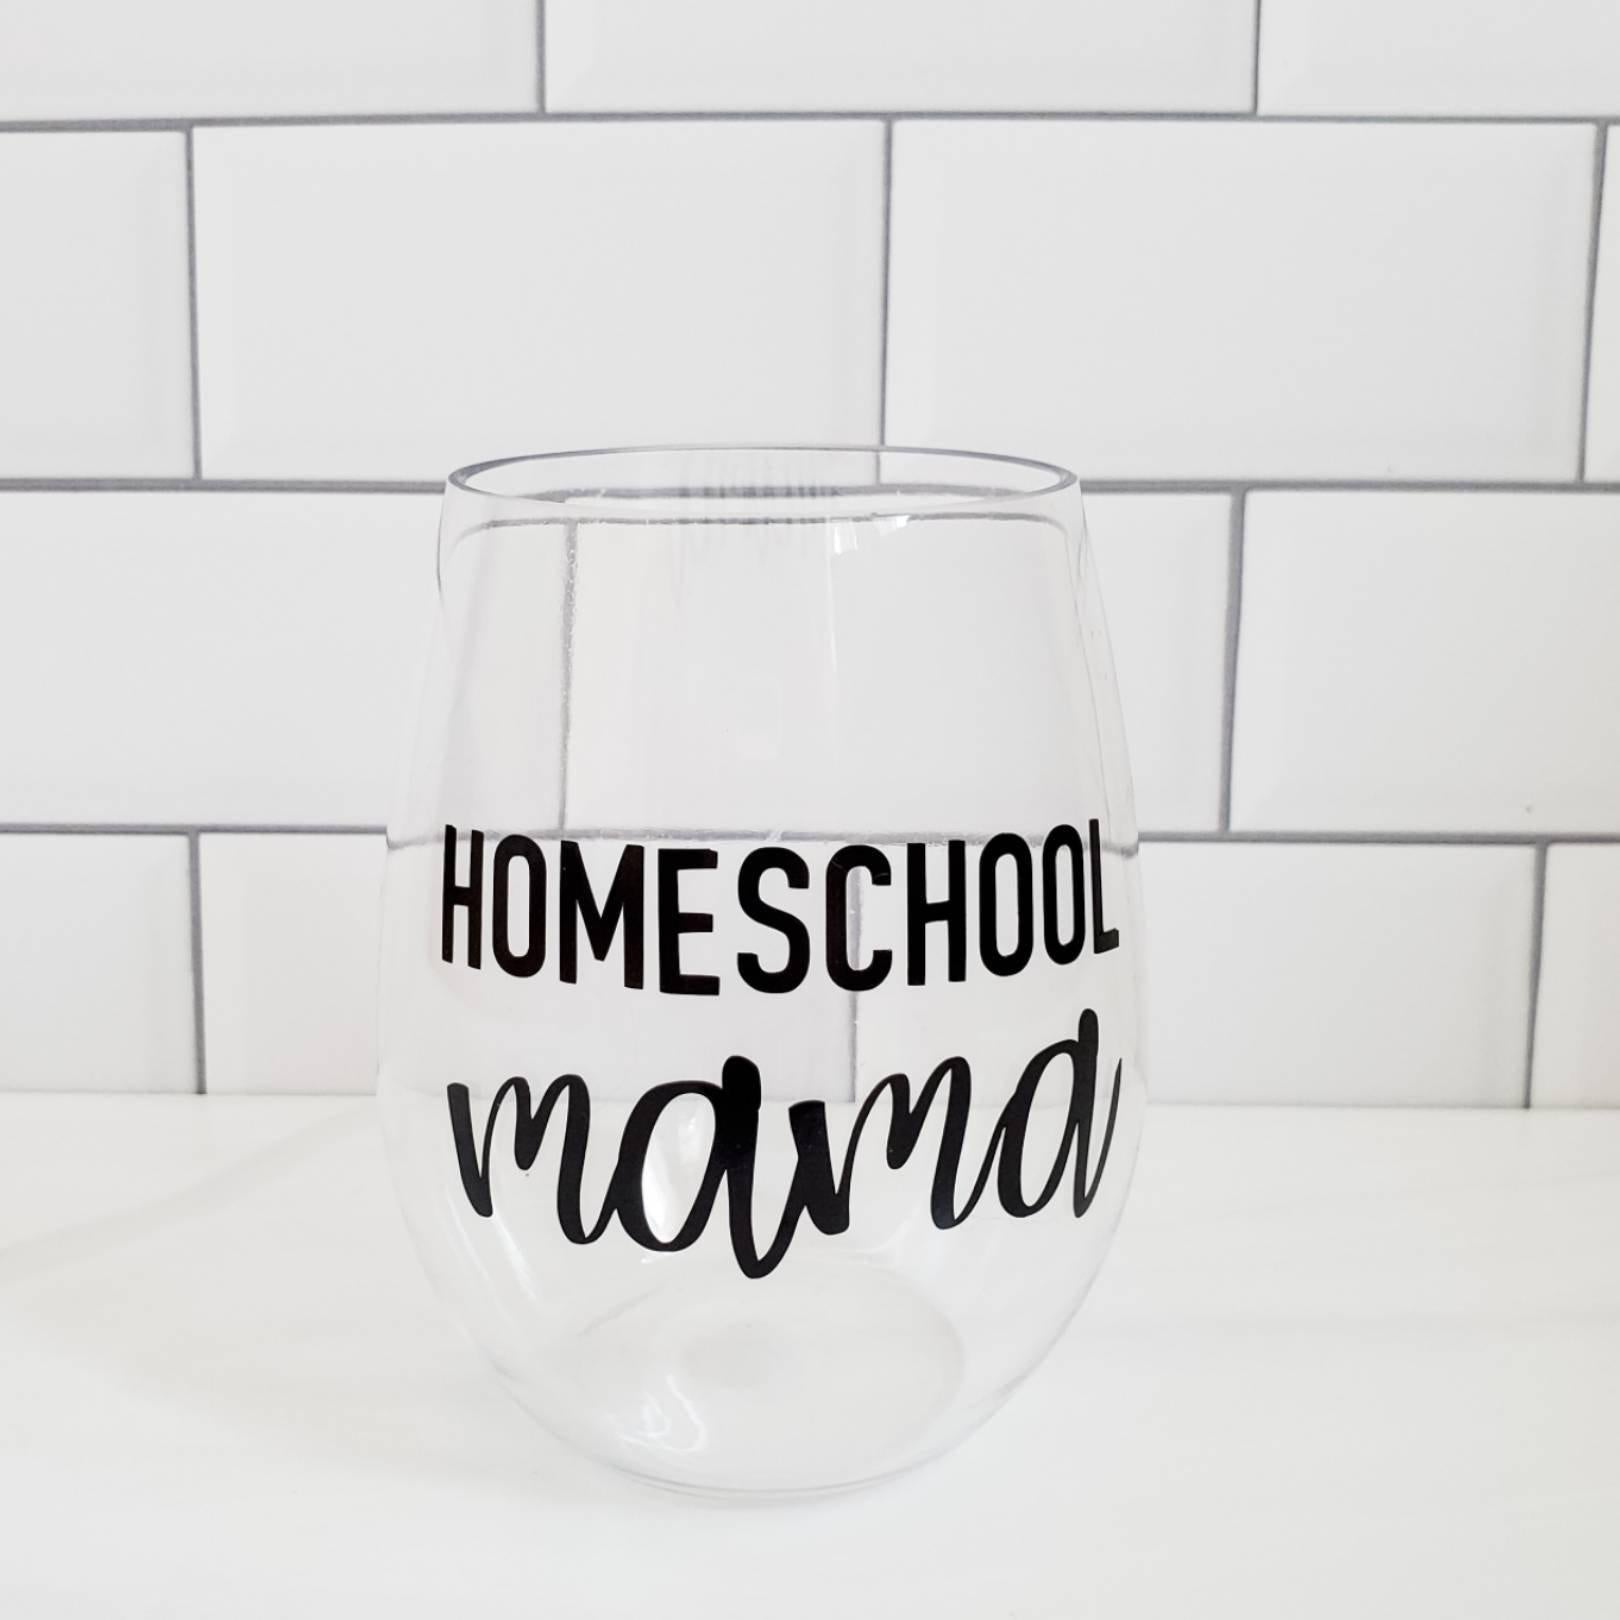 BECAUSE DISTANCE LEARNING Homeschool Acrylic Wine Glass Salt and Sparkle